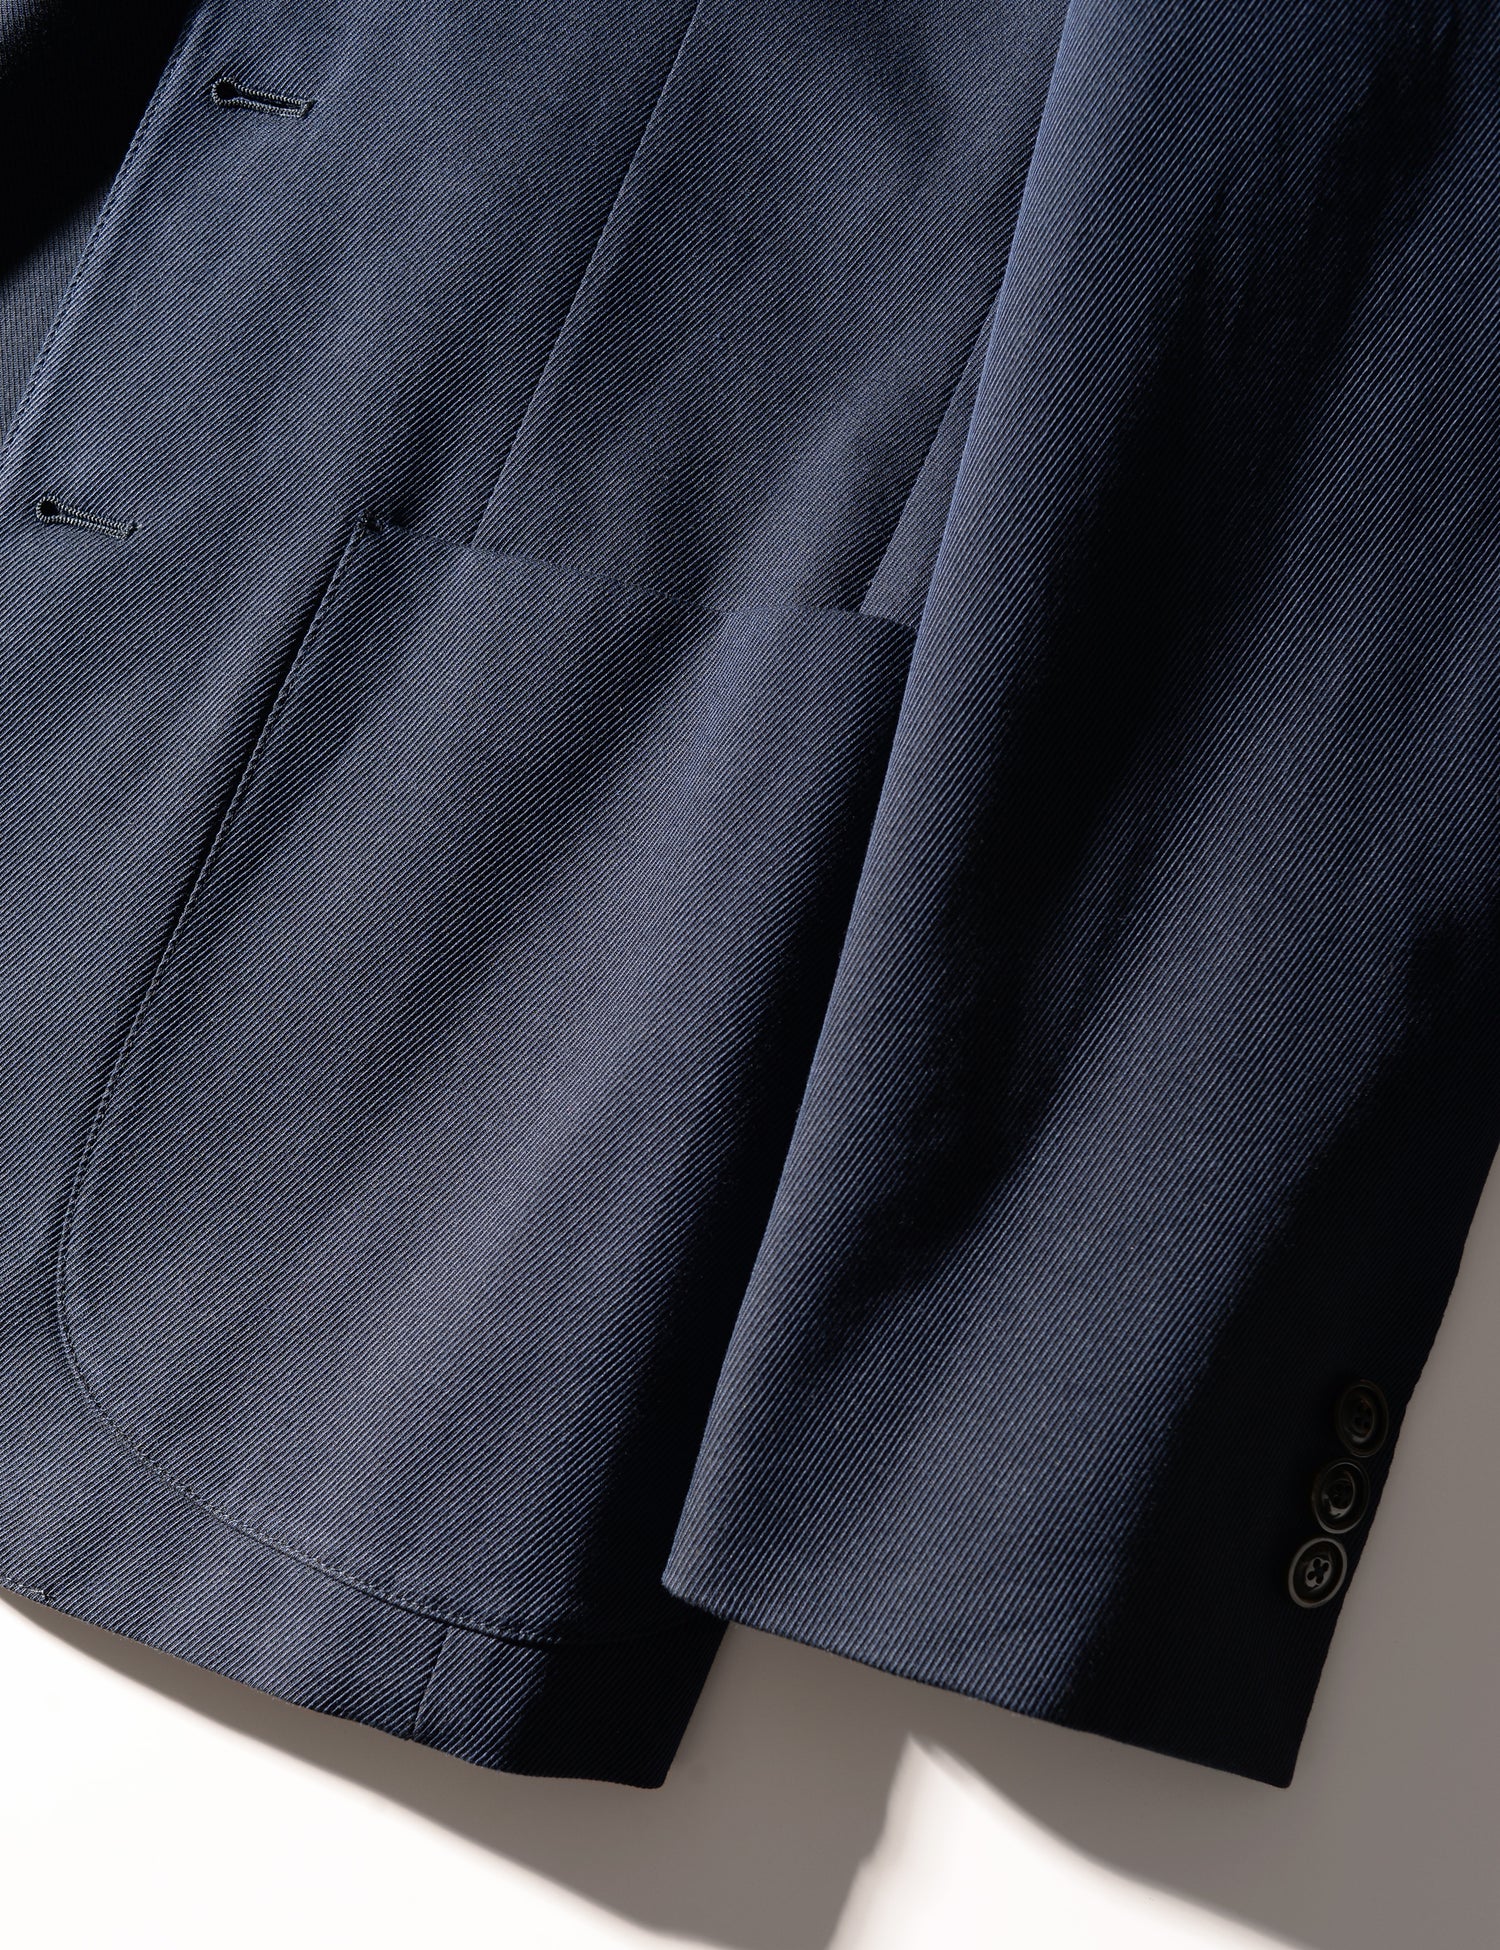 Detail shot showing cuff and patch pocket on Brooklyn Tailors BKT35 Unstructured Jacket in Cavalry Twill - Navy